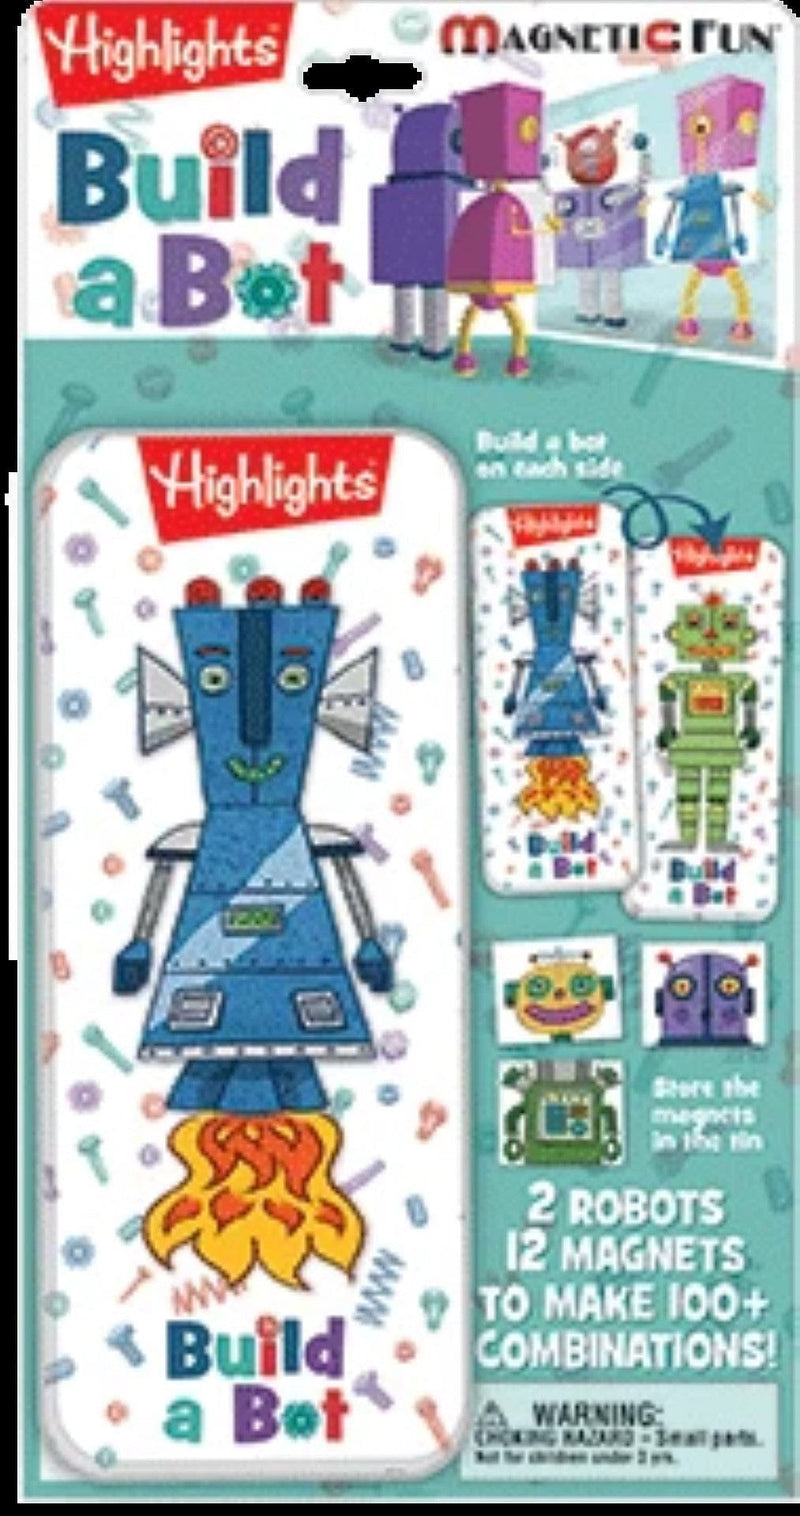 Magnetic Fun Mini Tin: Highlights - Build a Bot - Shelburne Country Store